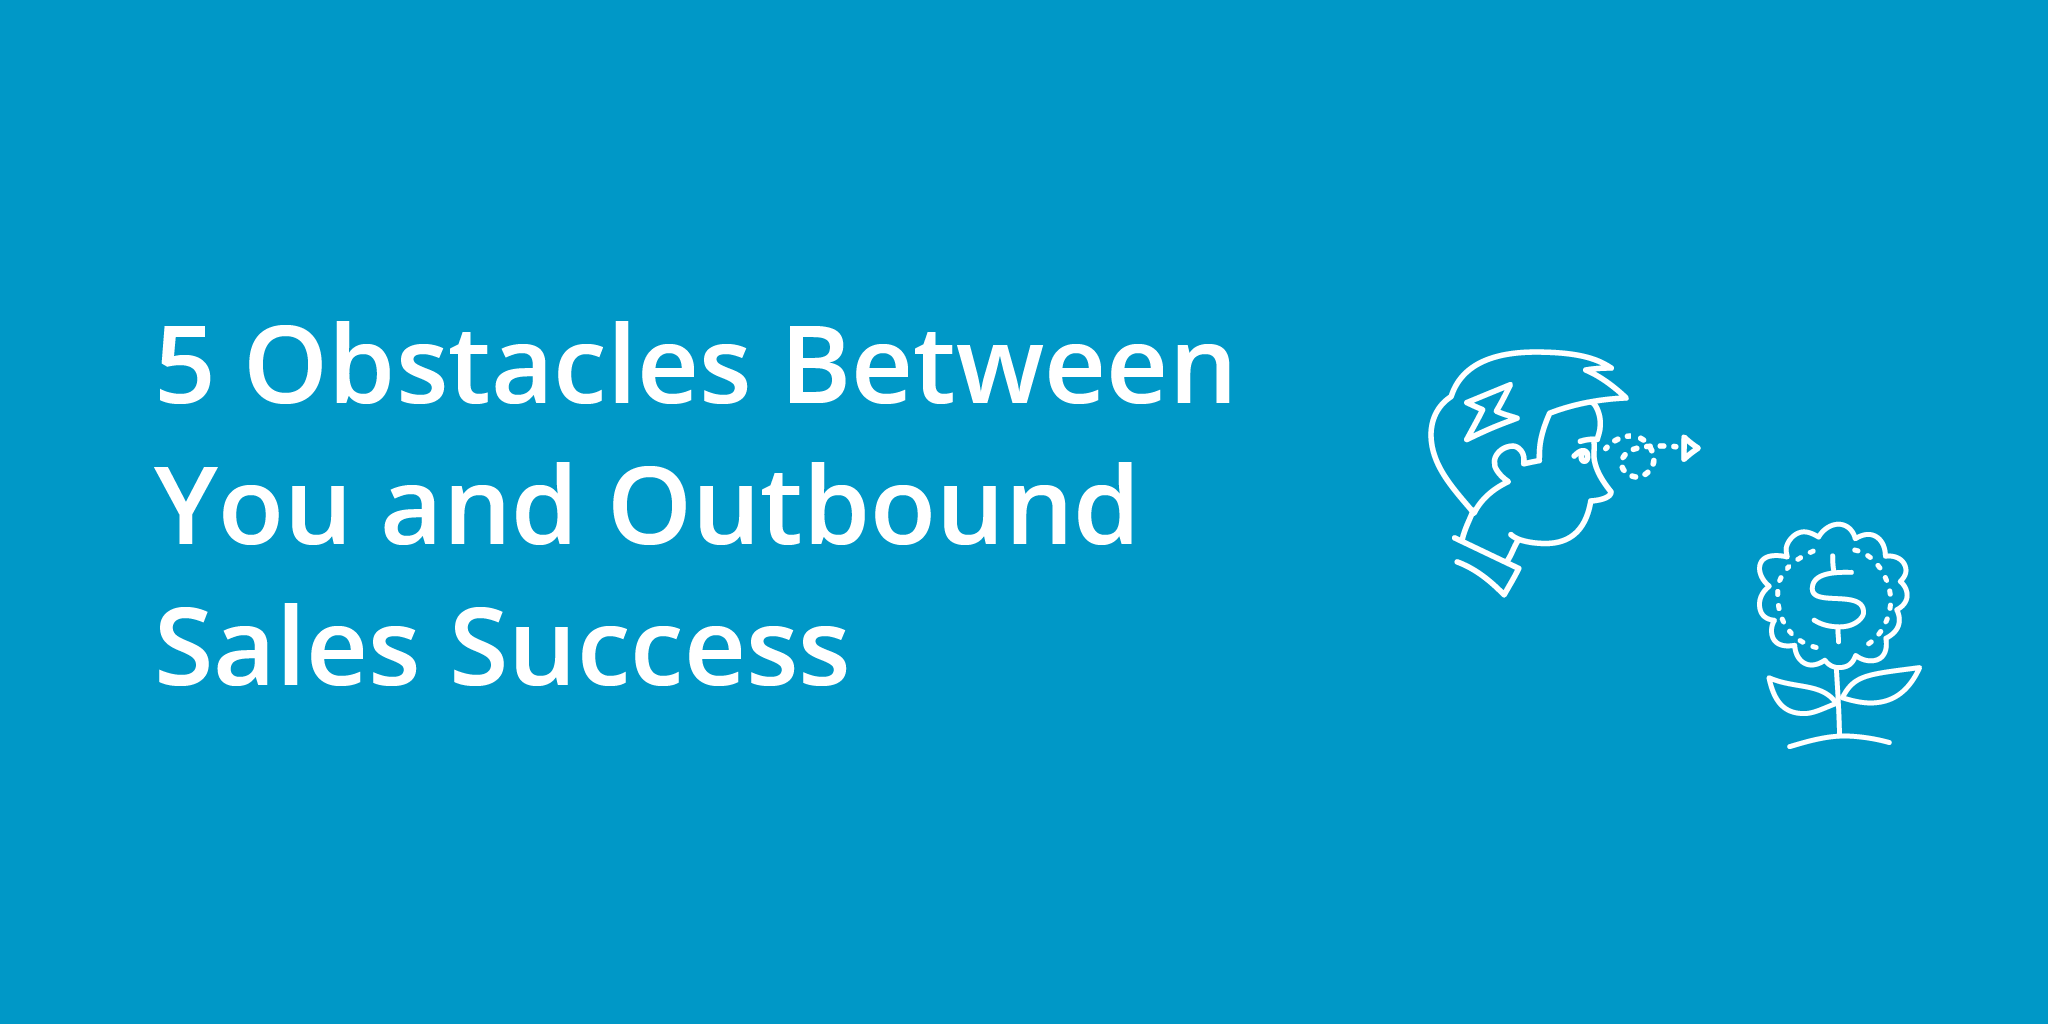 5 Obstacles Between You and Outbound Sales Success | Telephones for business